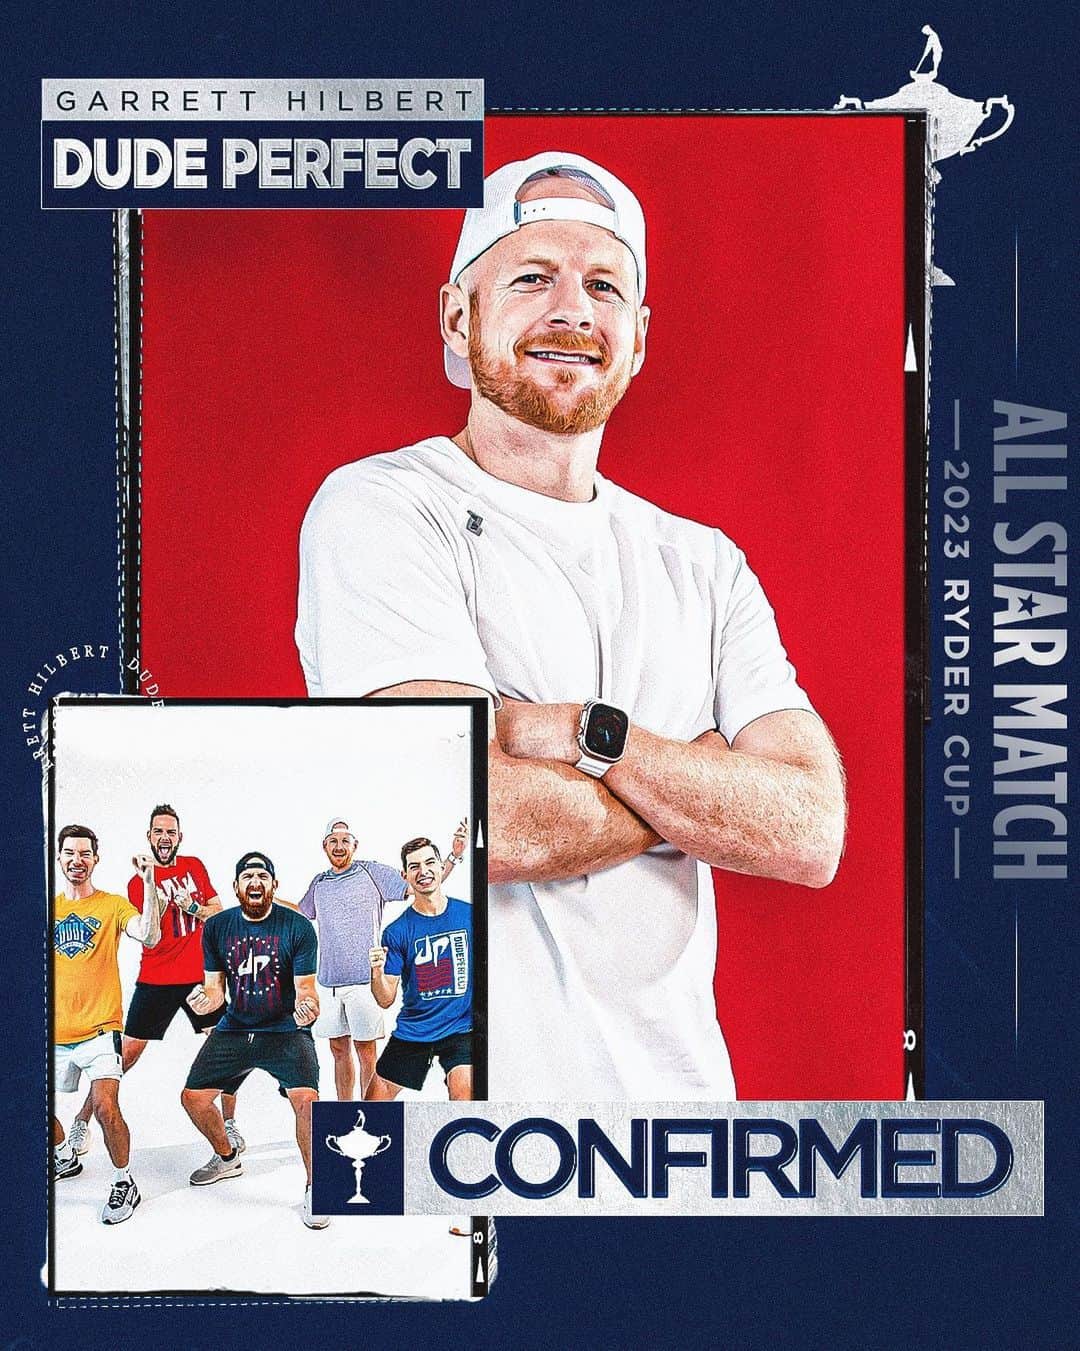 Dude Perfectのインスタグラム：「Team Monty 🏌️‍♂️  @dudeperfect’s @garretthilbert is confirmed for the Ryder Cup #AllStarMatch.」